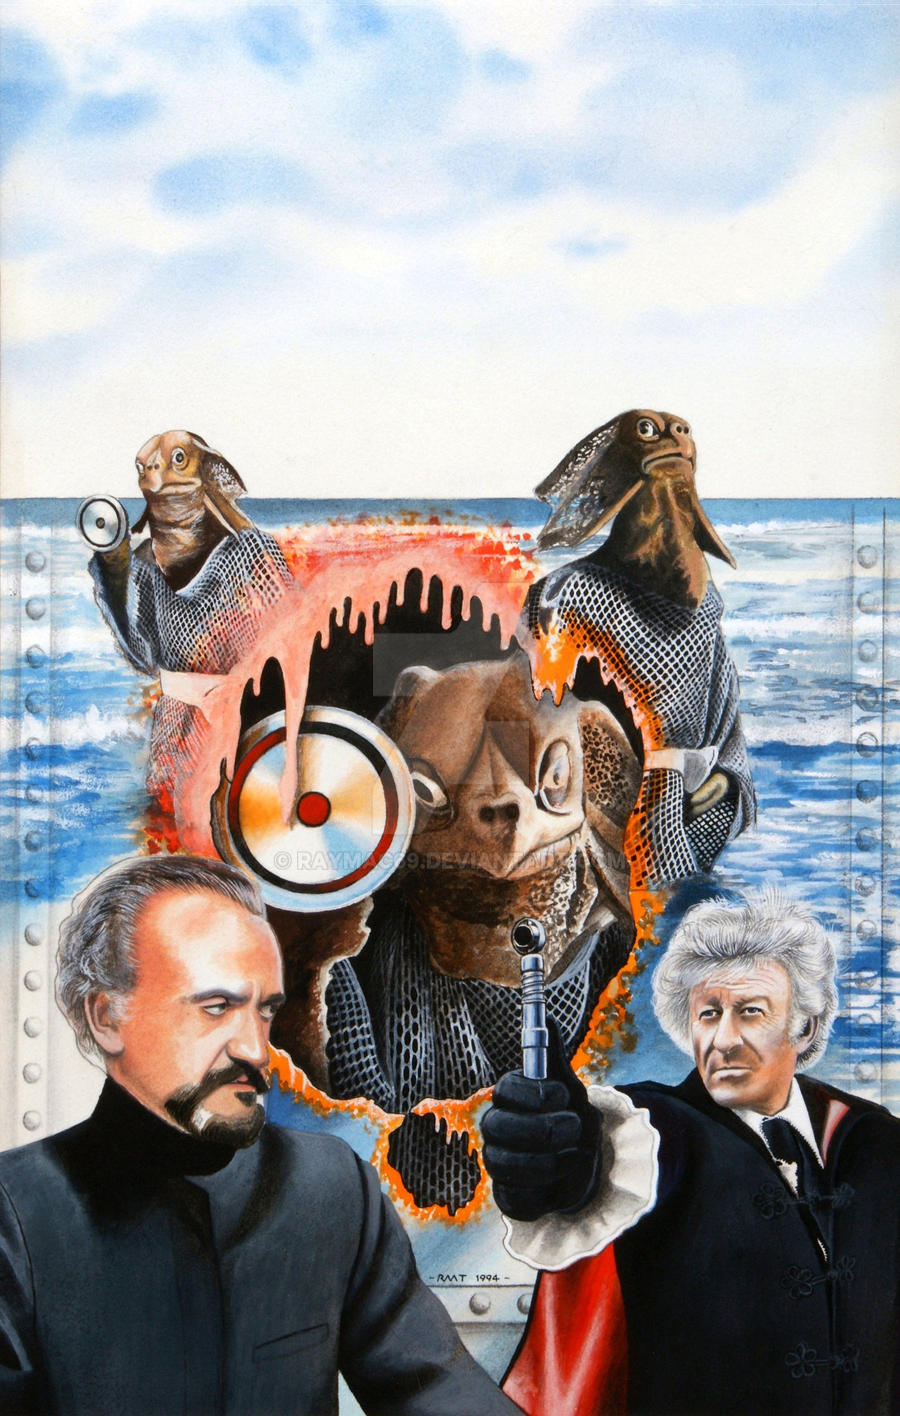 Doctor Who - The Sea Devils by RAYMAC69 on DeviantArt